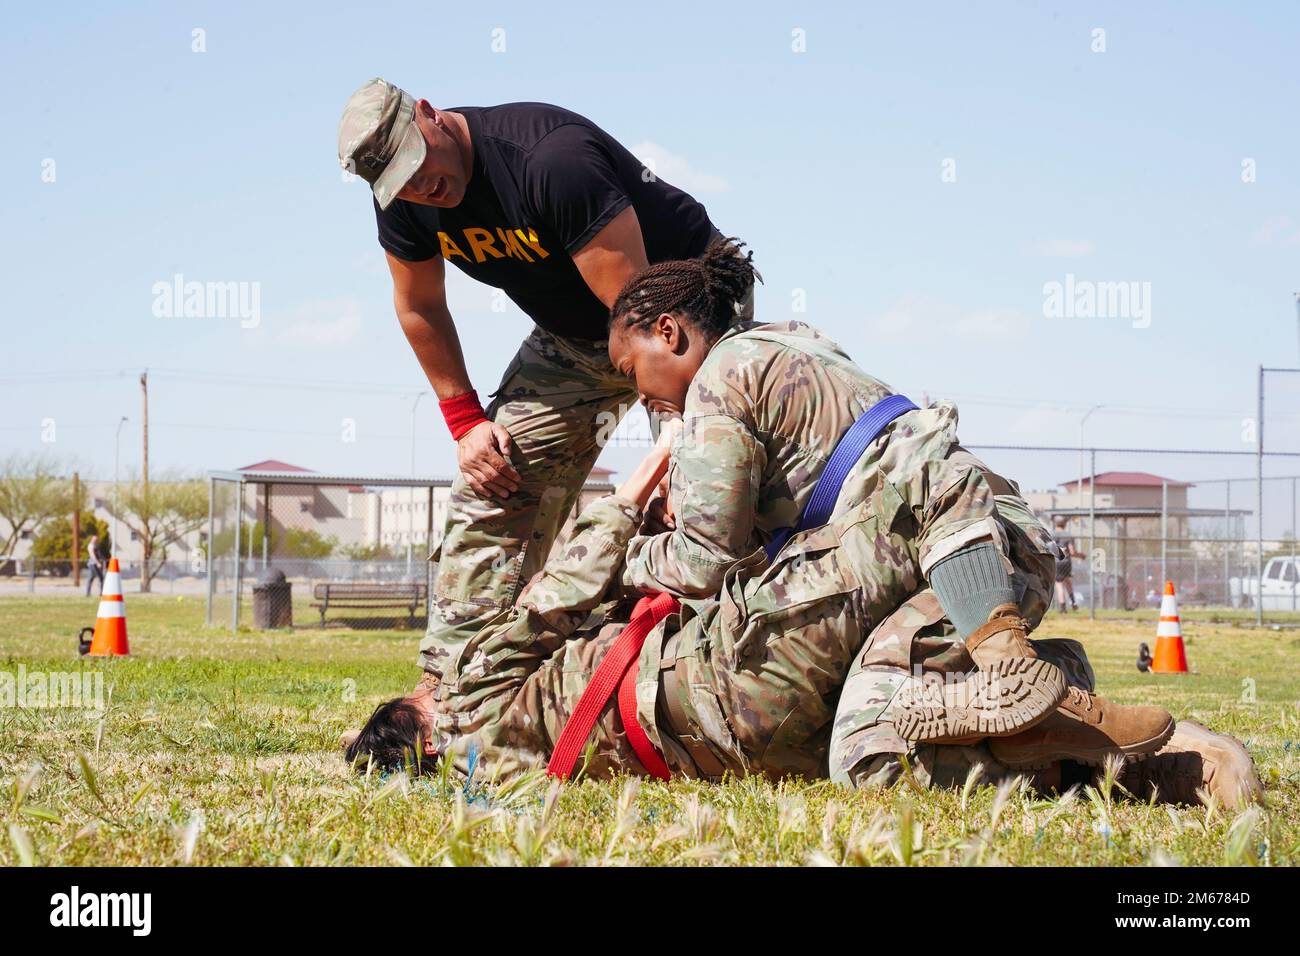 U.S. Army Capt. Ogechukwu Erinne, assigned to the Weed Army Community Hospital at Fort Irwin, California, competes with 1st Lt. Godin, assigned to the Irwin Army Community Hospital at Fort Riley, Kansas, during the bracket-style combatives tournament of the 2022 Regional Health Command-Central Best Leader Competition in Fort Bliss, Texas, April 10, 2022.     The competition promotes esprit de corps throughout the Army while recognizing soldiers, noncommissioned officers, and officers who demonstrate commitment to the Army values and embody the warrior ethos. The competition challenges the Army Stock Photo